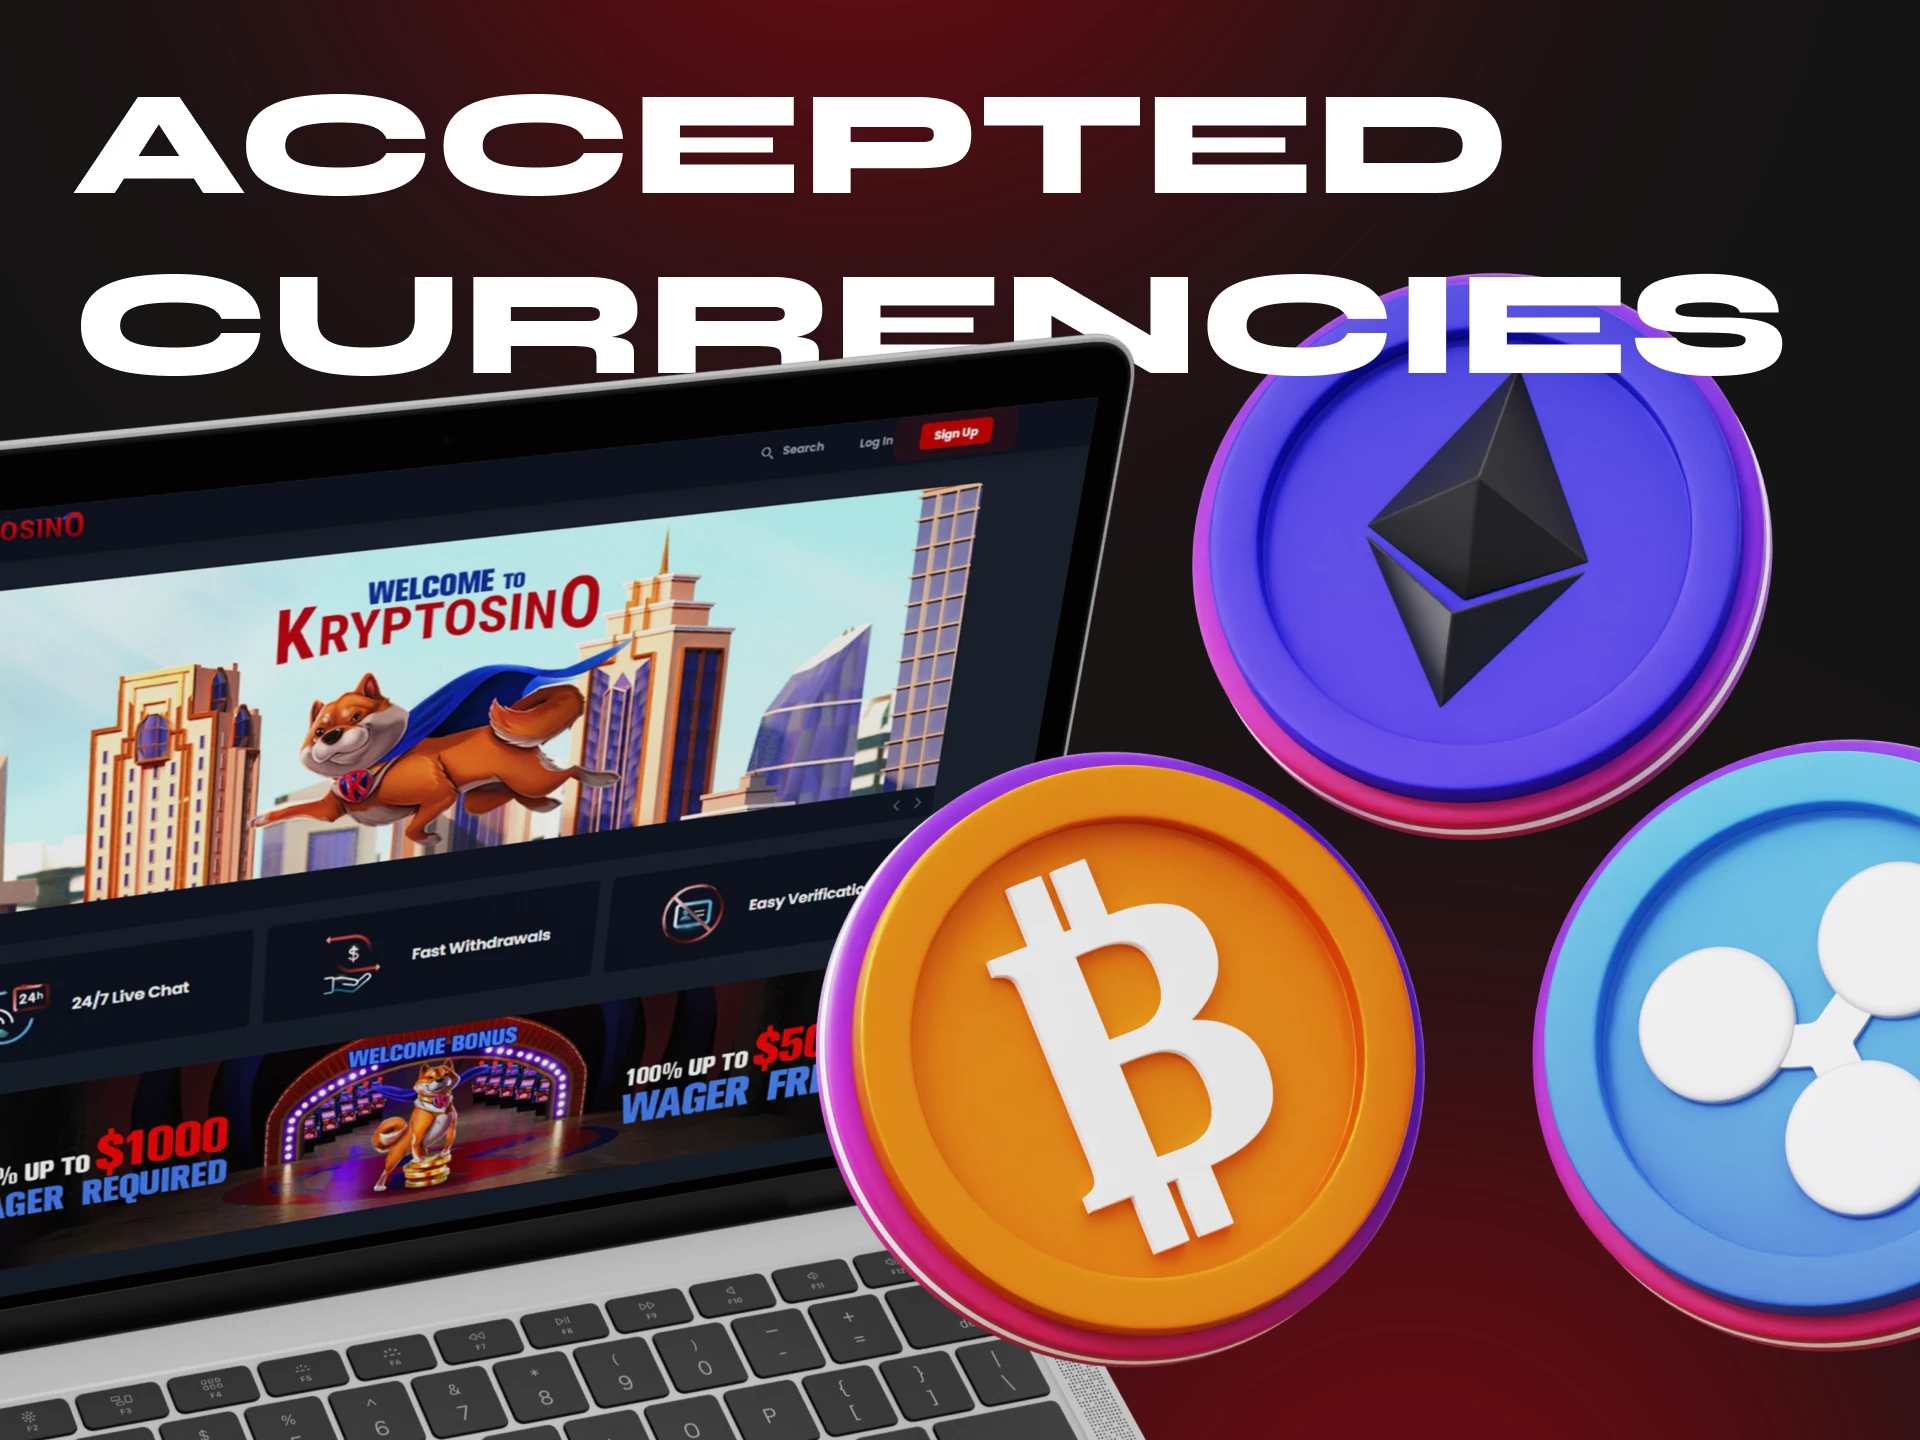 Find out what currencies are accepted at Kryptosino Casino.